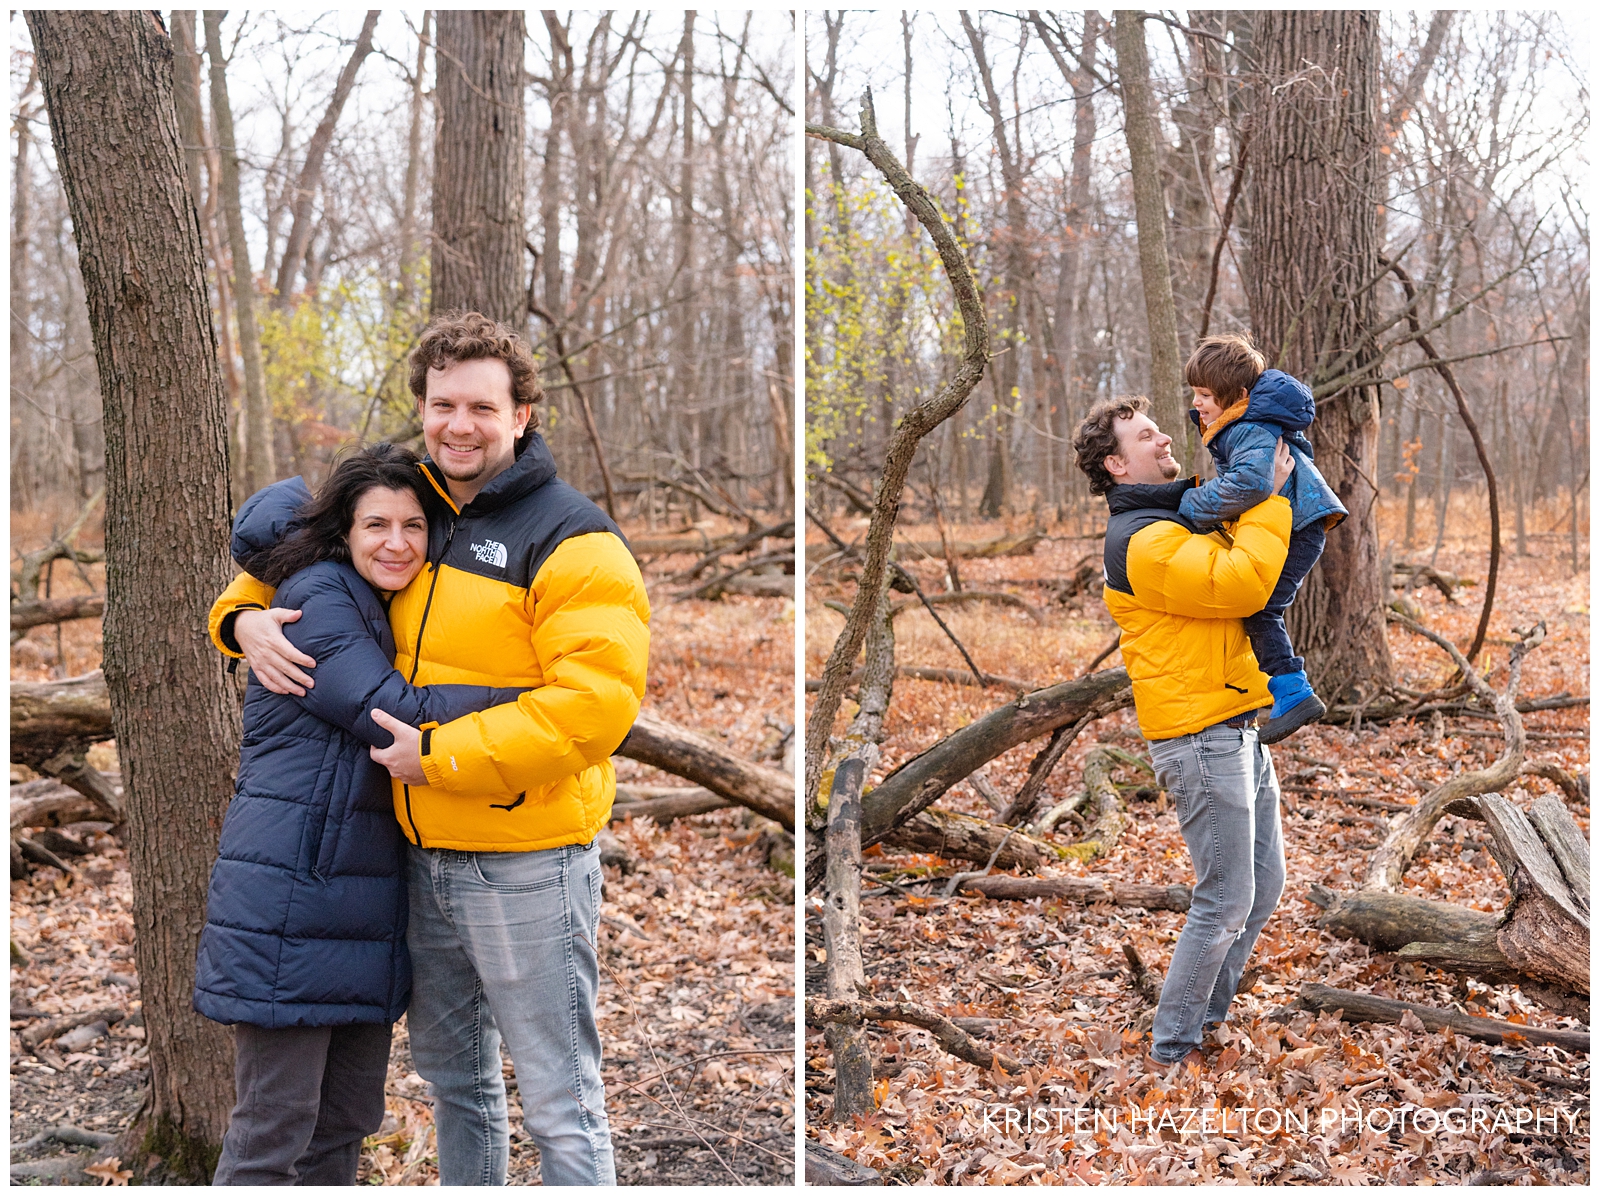 Candid photos of a young family in the woods